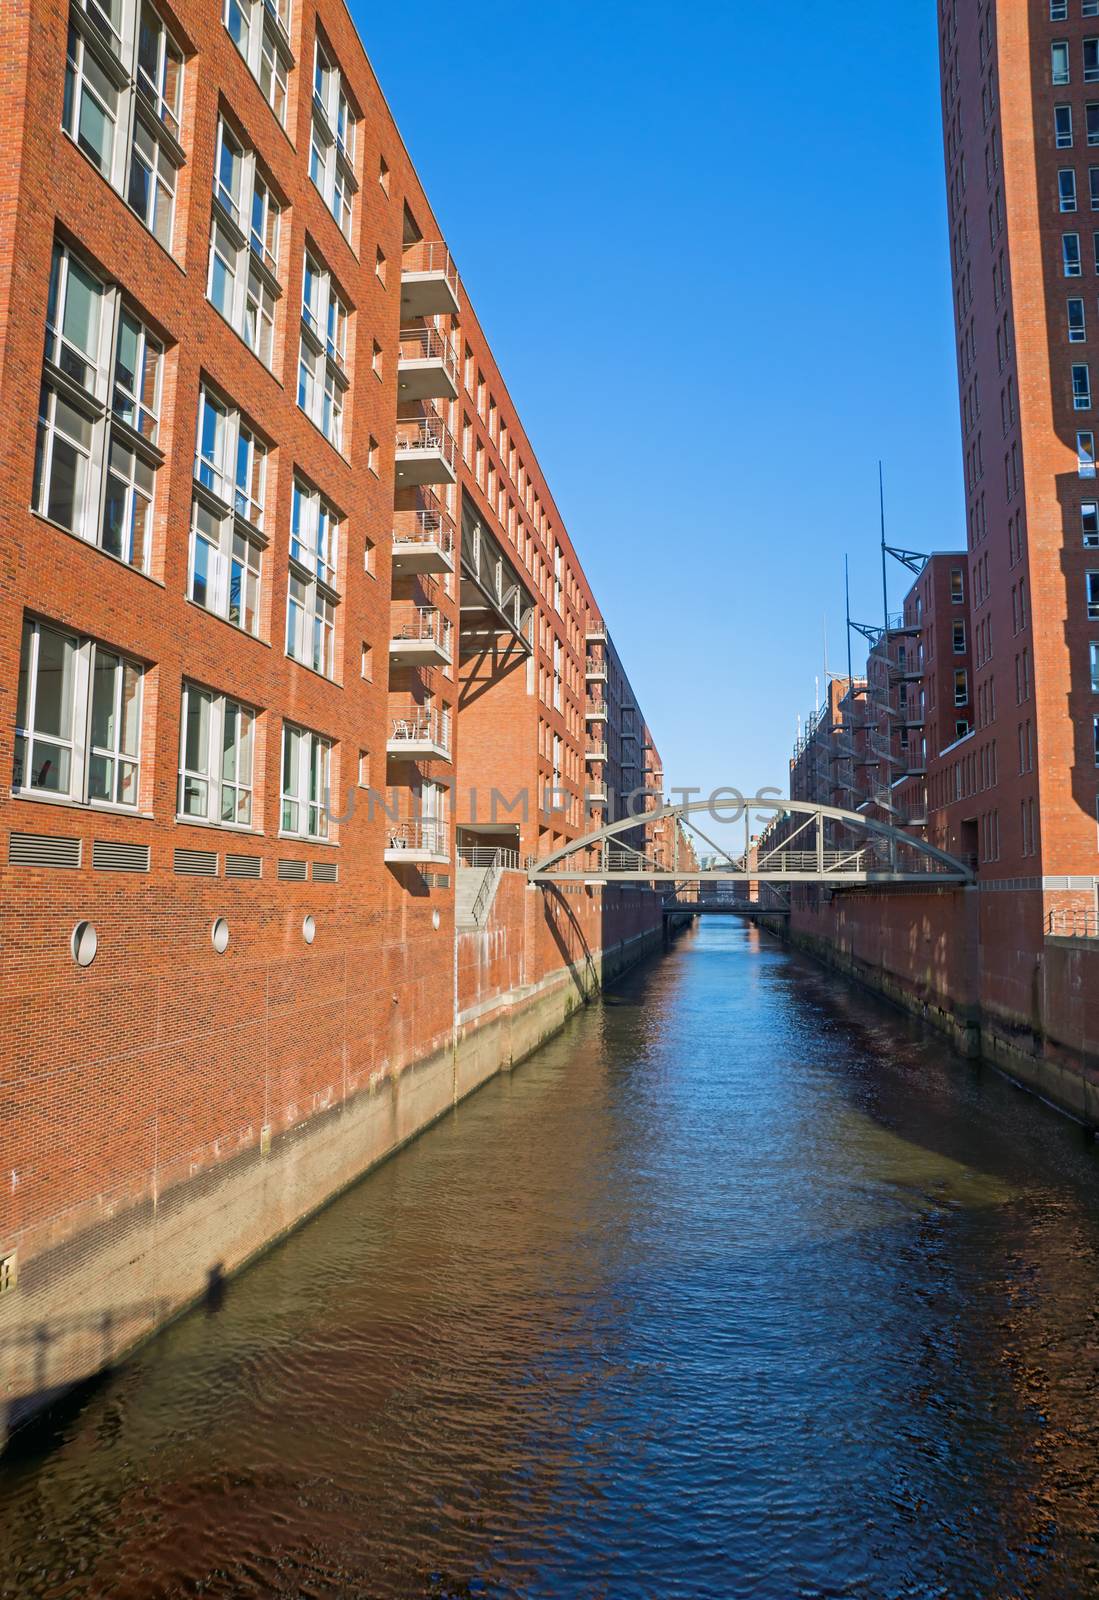 One of the many channels in the Speicherstadt in Hamburg, Germany